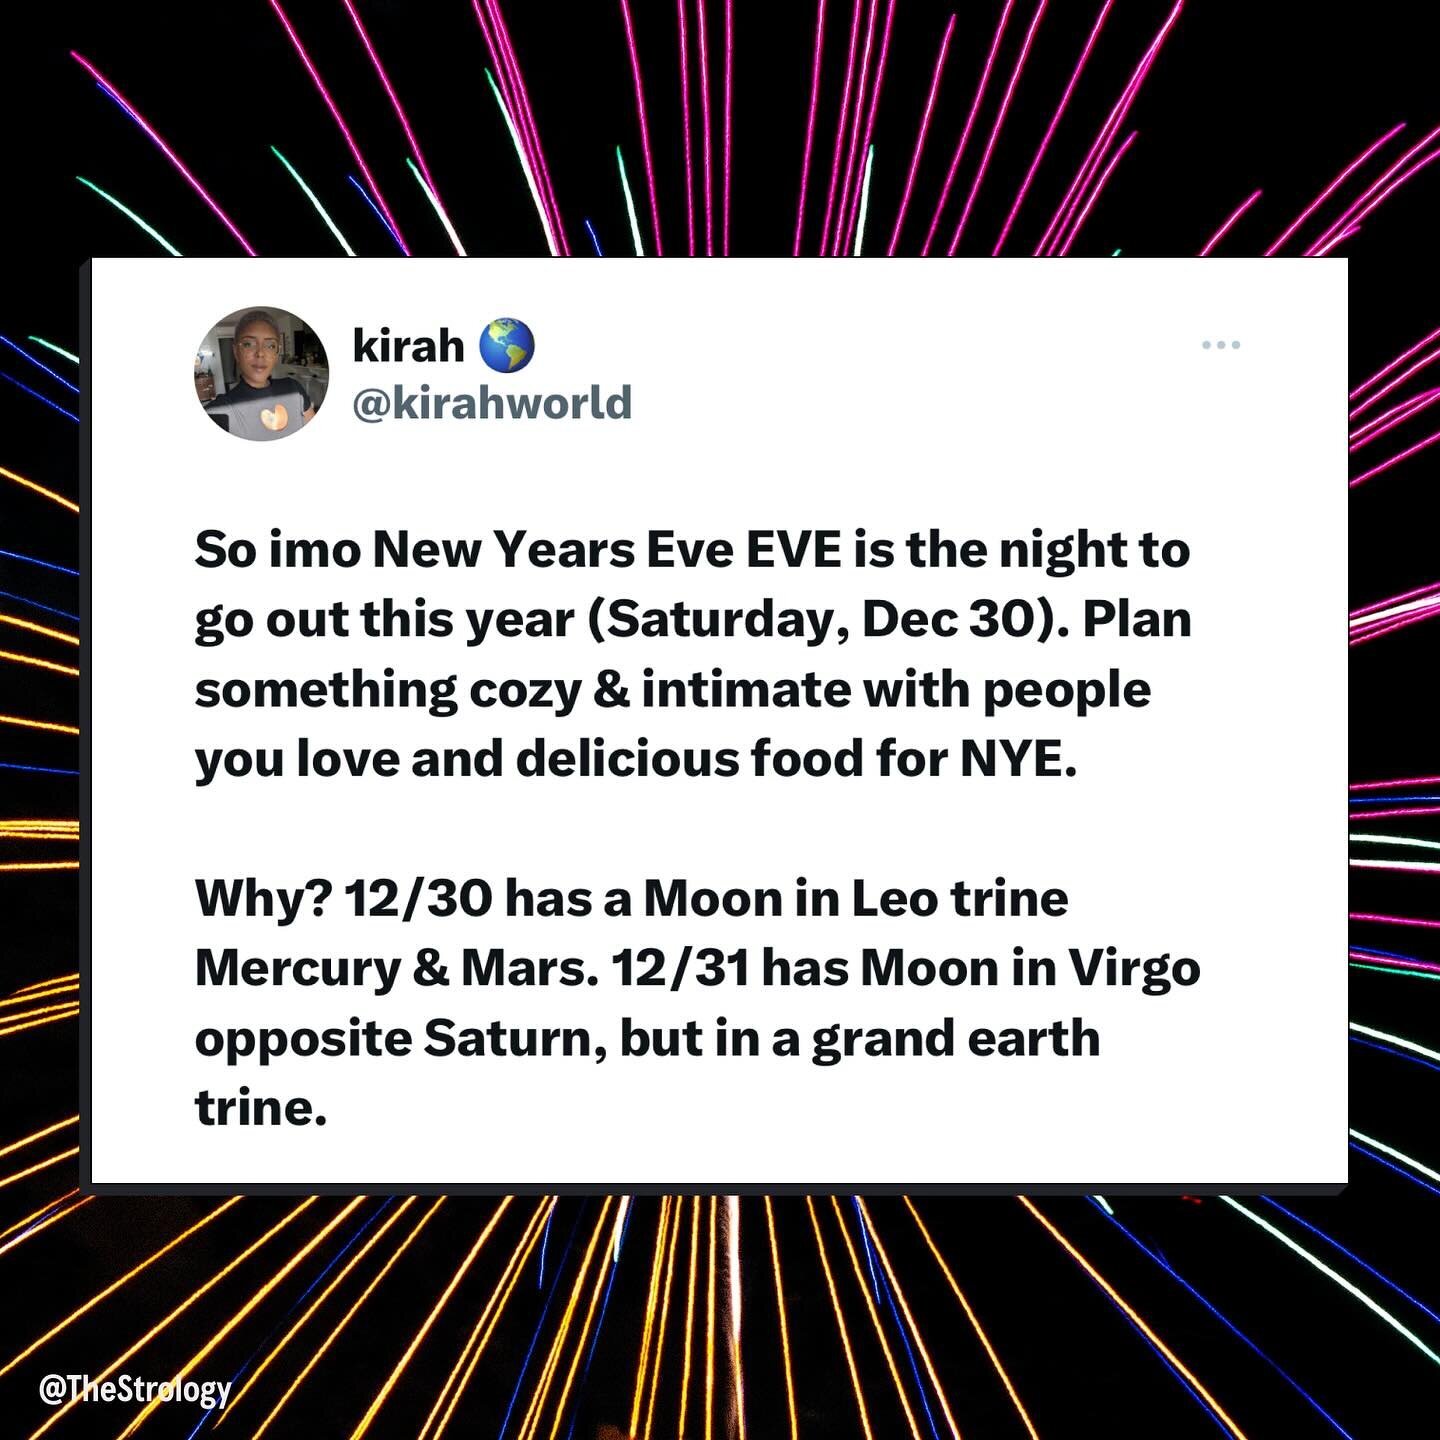 HEADS UP FOR YOUR NEW YEARS PLANS!! In my opinion, the astrology of Friday, December 30th is much better for going out for a fun night whereas New Year&rsquo;s Eve&rsquo;s astrology seems much better suited for a cozy, intimate gathering with people 